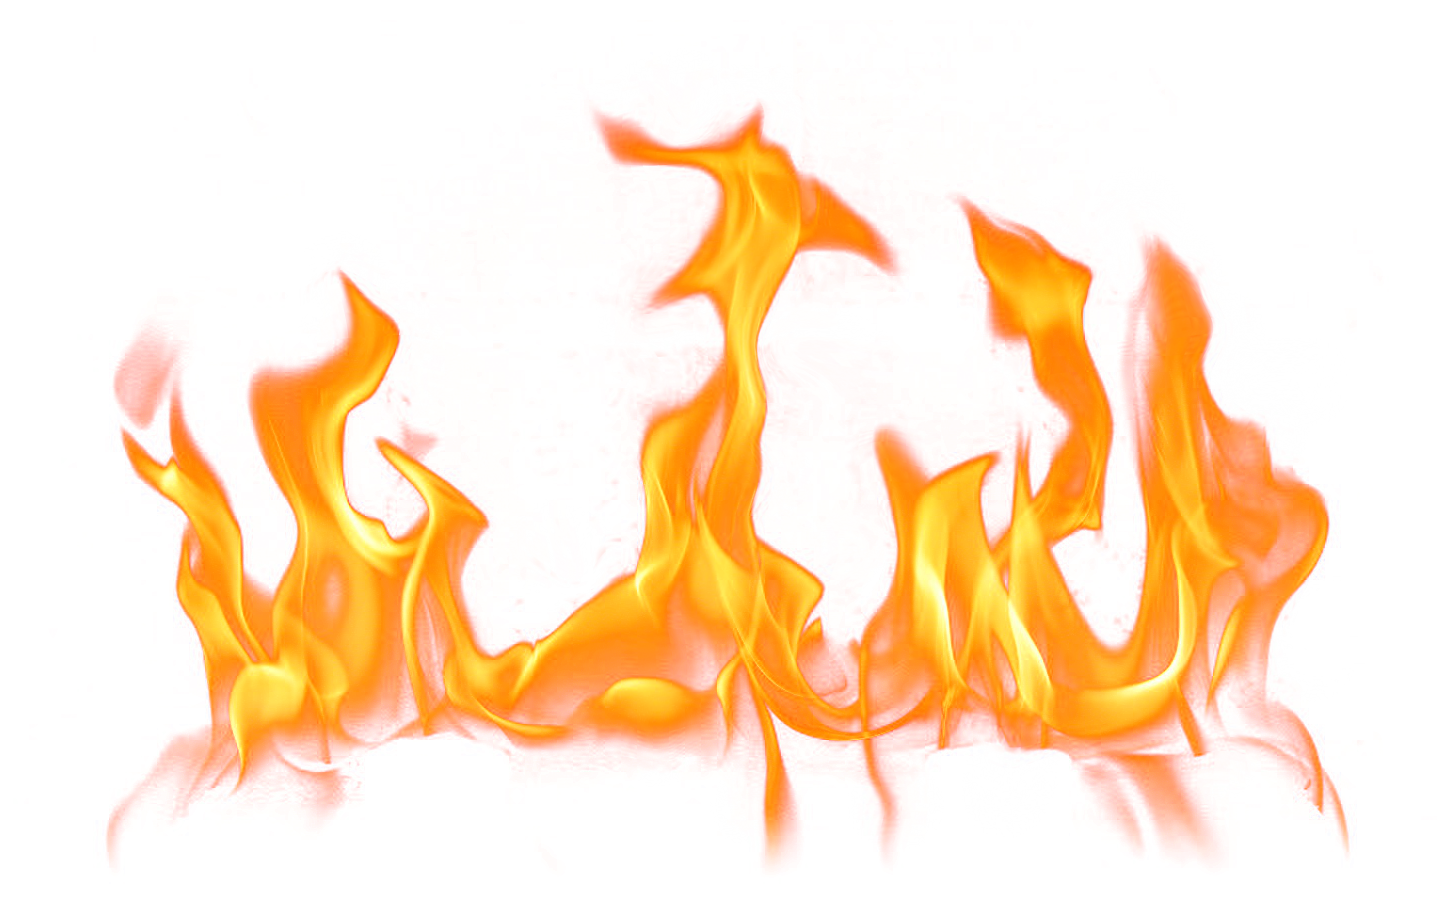 Fire png image gallery. Flames clipart gold